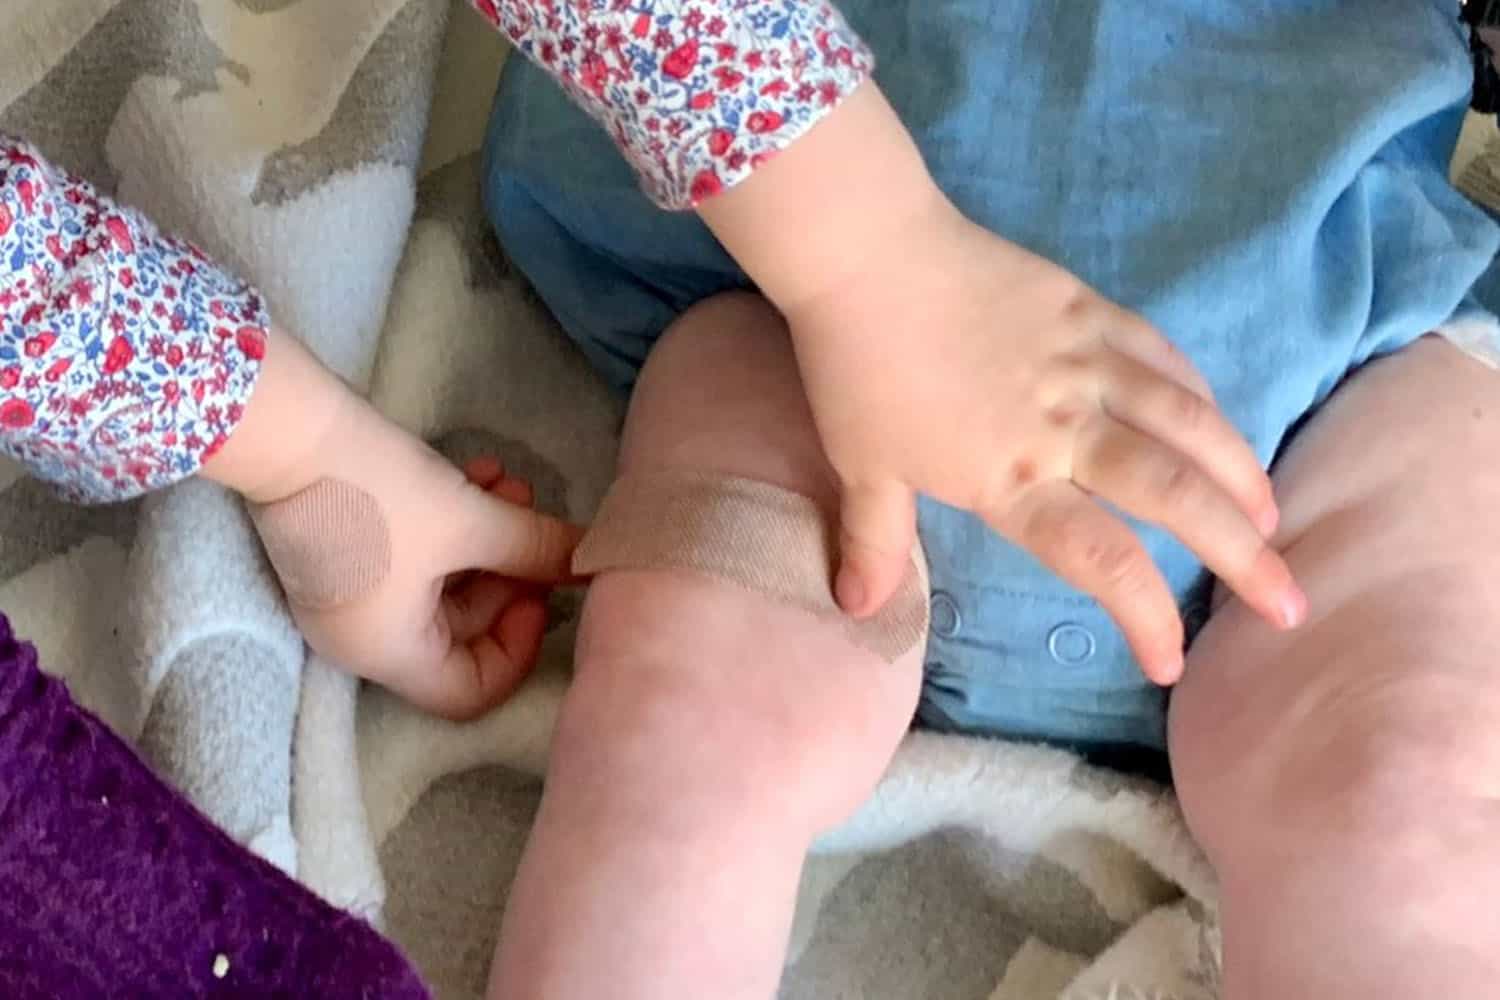 Child playing nurses and doctors, puts a plaster on an a baby's leg.